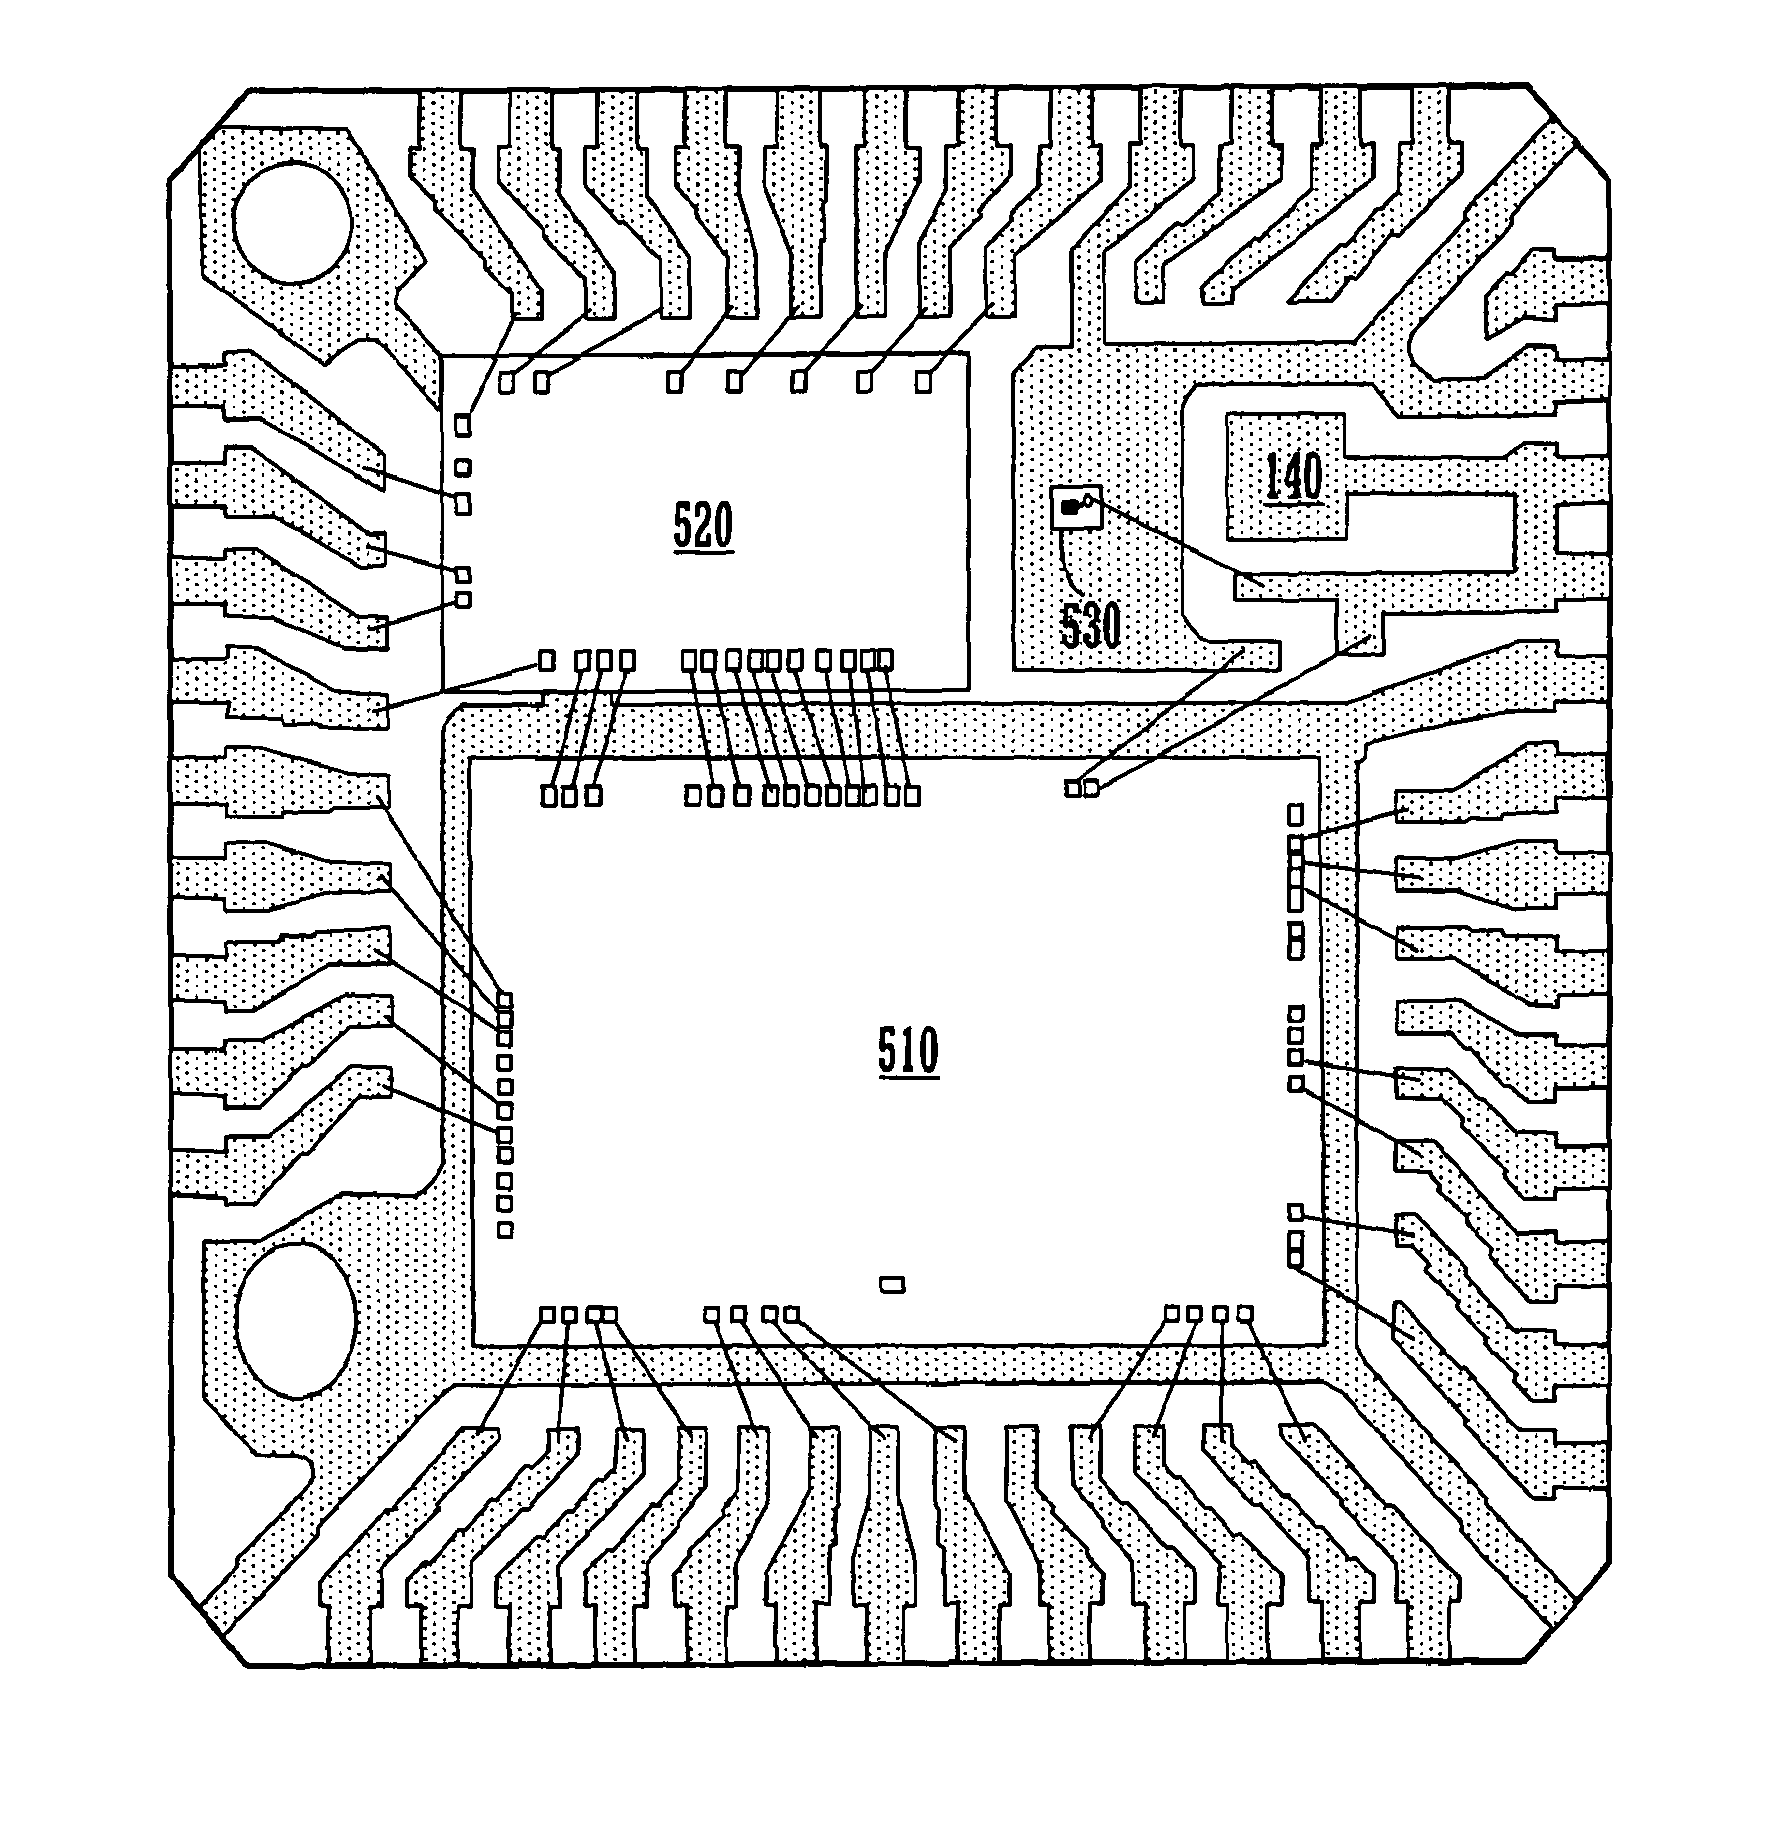 Multiple die paddle leadframe and semiconductor device package